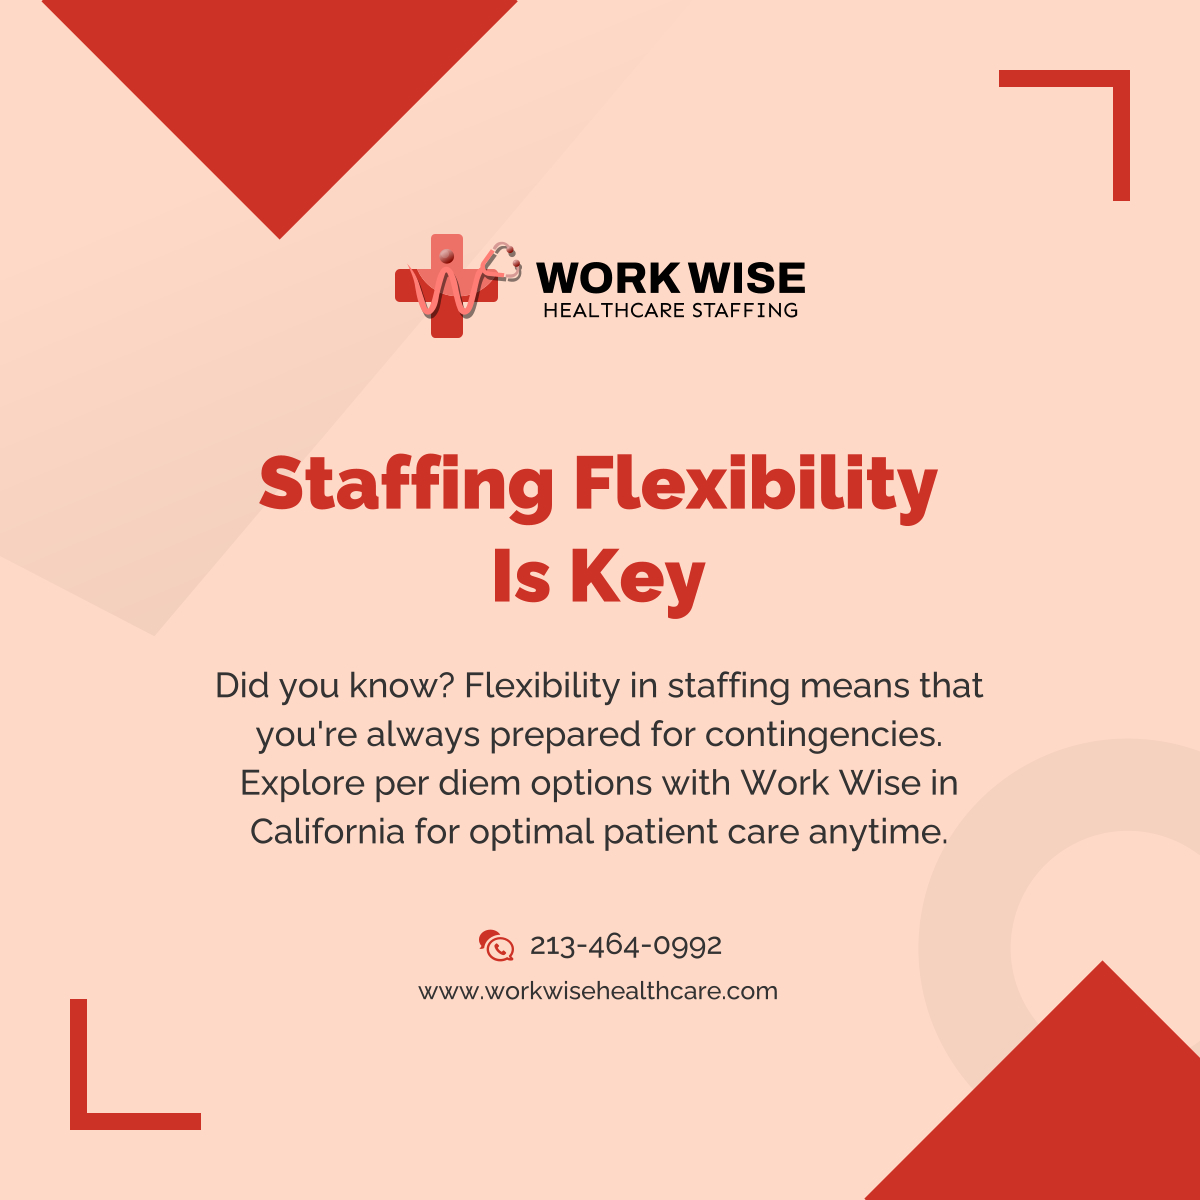 It's time to amplify your healthcare operations! Work Wise Staffing and Consulting is on a mission to eradicate medical staffing crises in Los Angeles. Let's ensure your facility is always ready to provide top-quality care. 

#LosAngelesCalifornia #MedicalStaffing